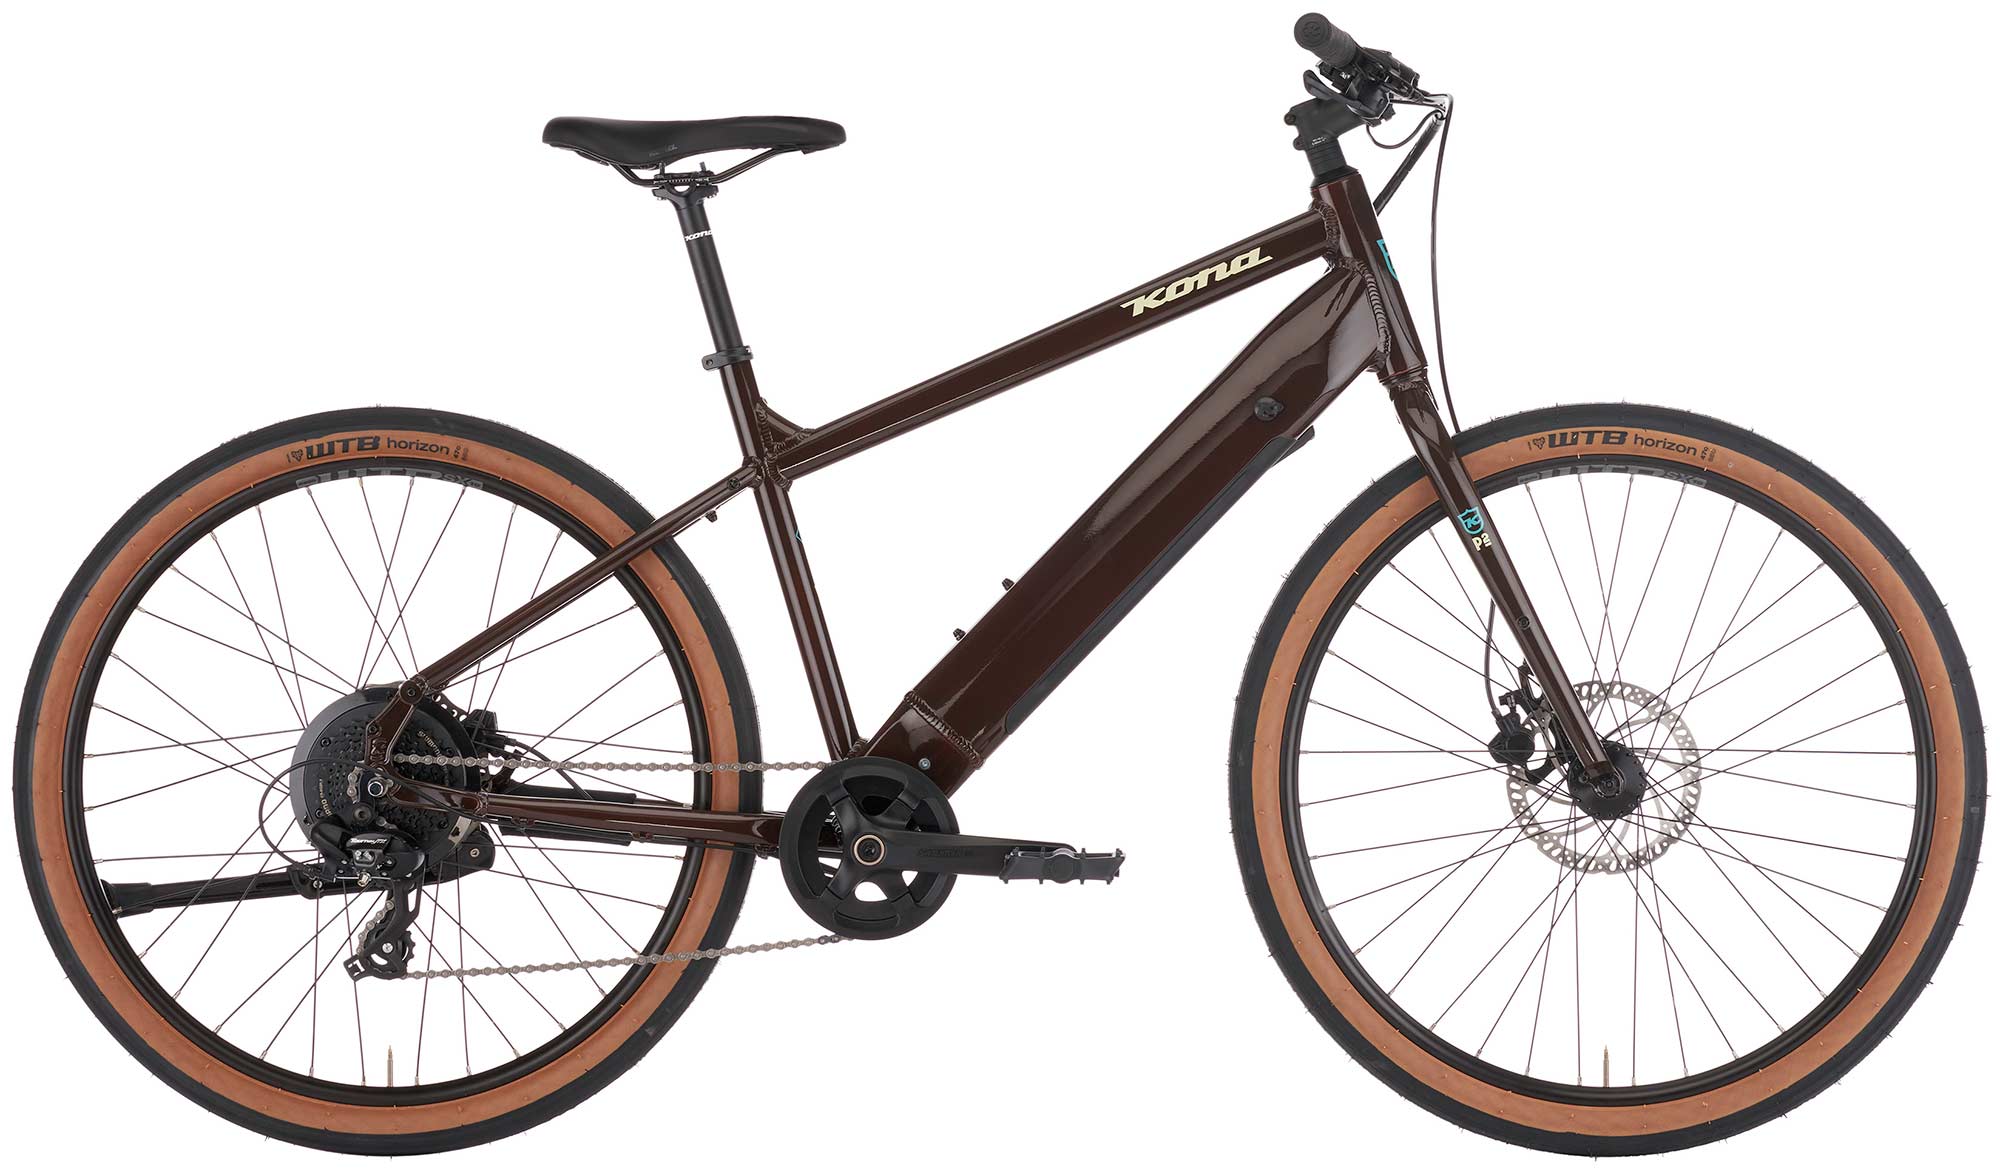 The Dew HD townie/commuter ebike comes equipped with a seven-speed Shimano Tourney drivetrain, hydraulic disc brakes, 47 x 650c WTB Horizon tires, and rack and fender mounts.